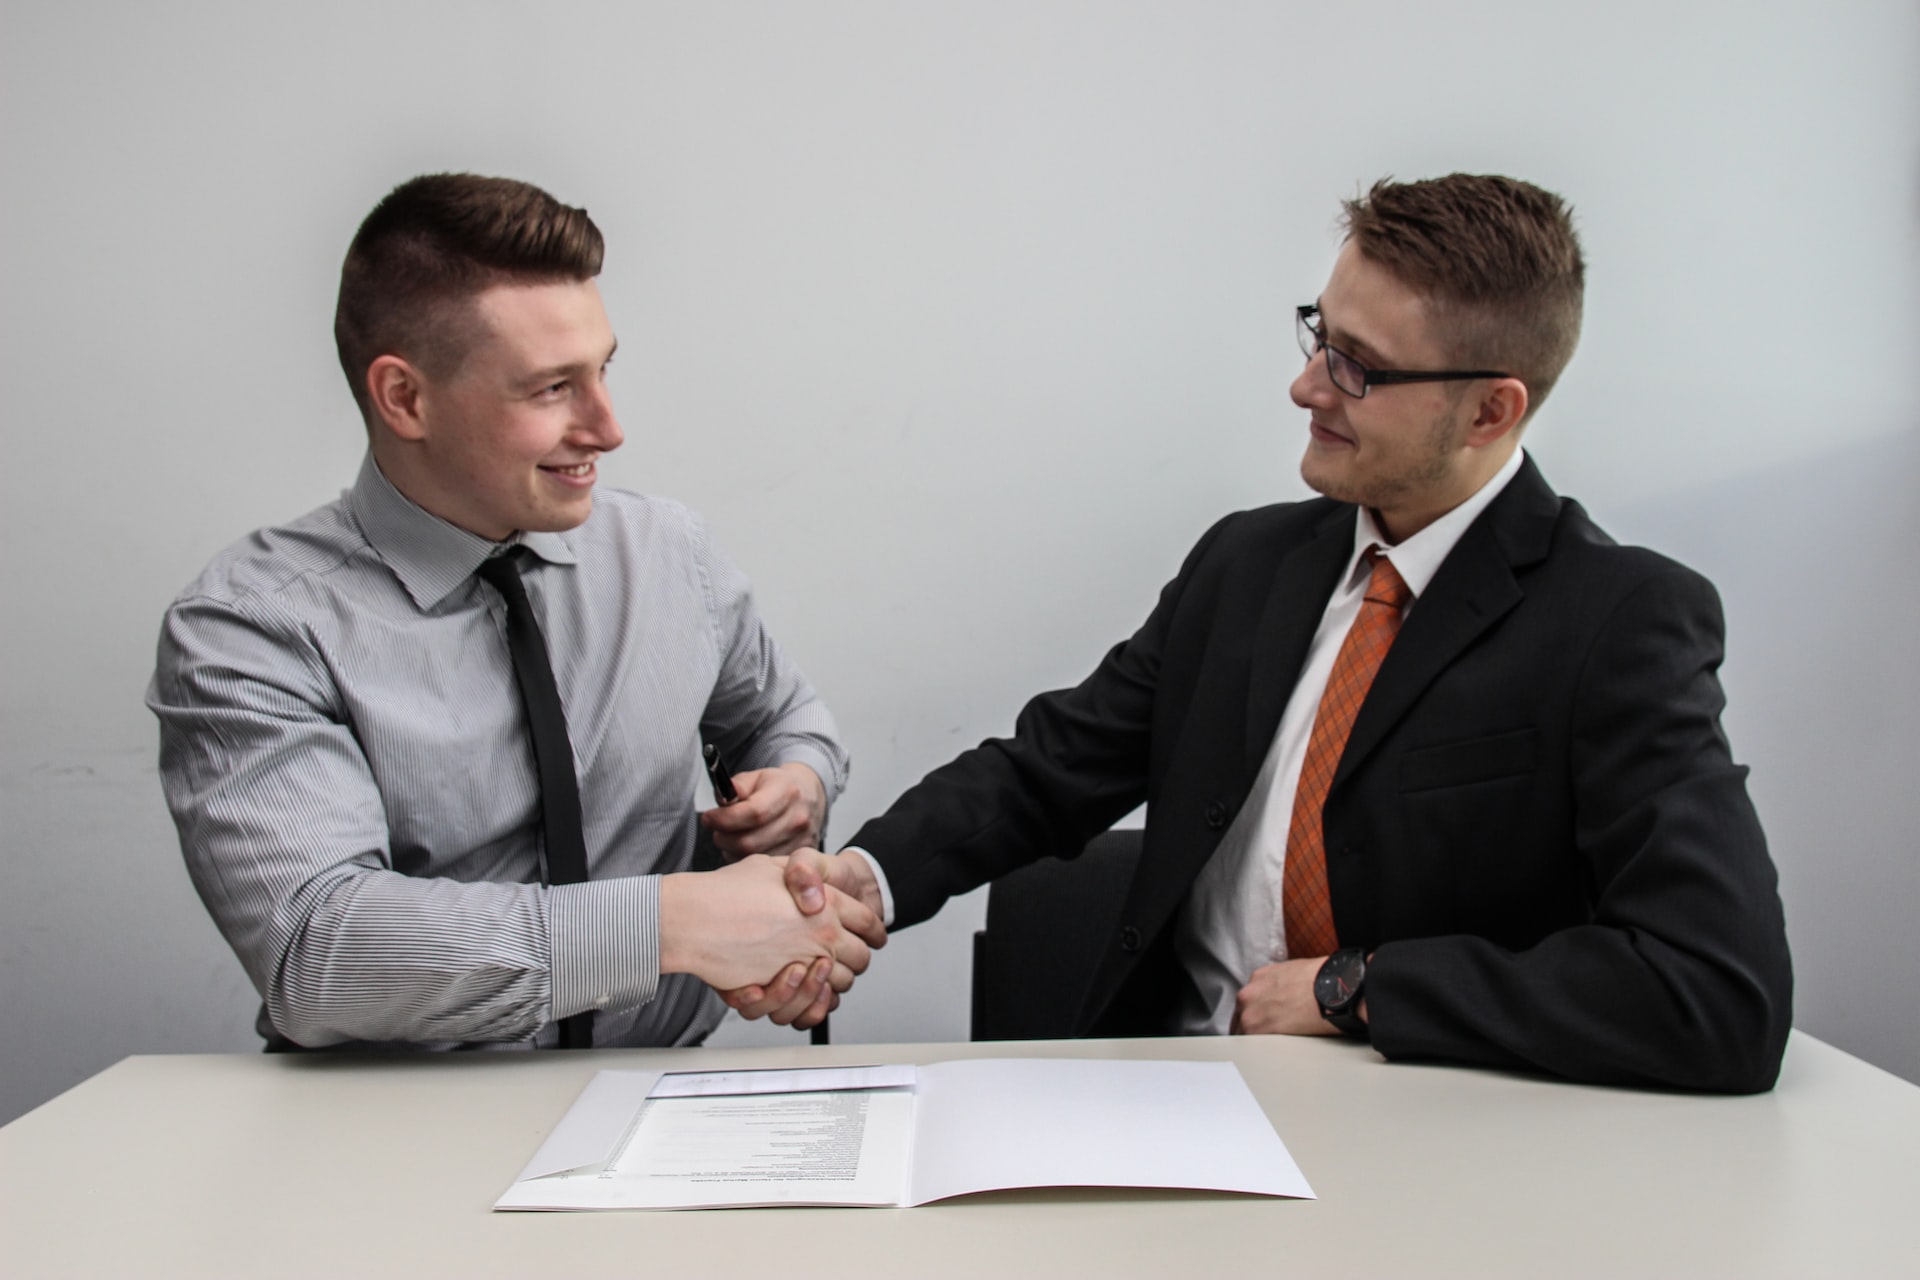 employer and employee shaking hands over employment contract